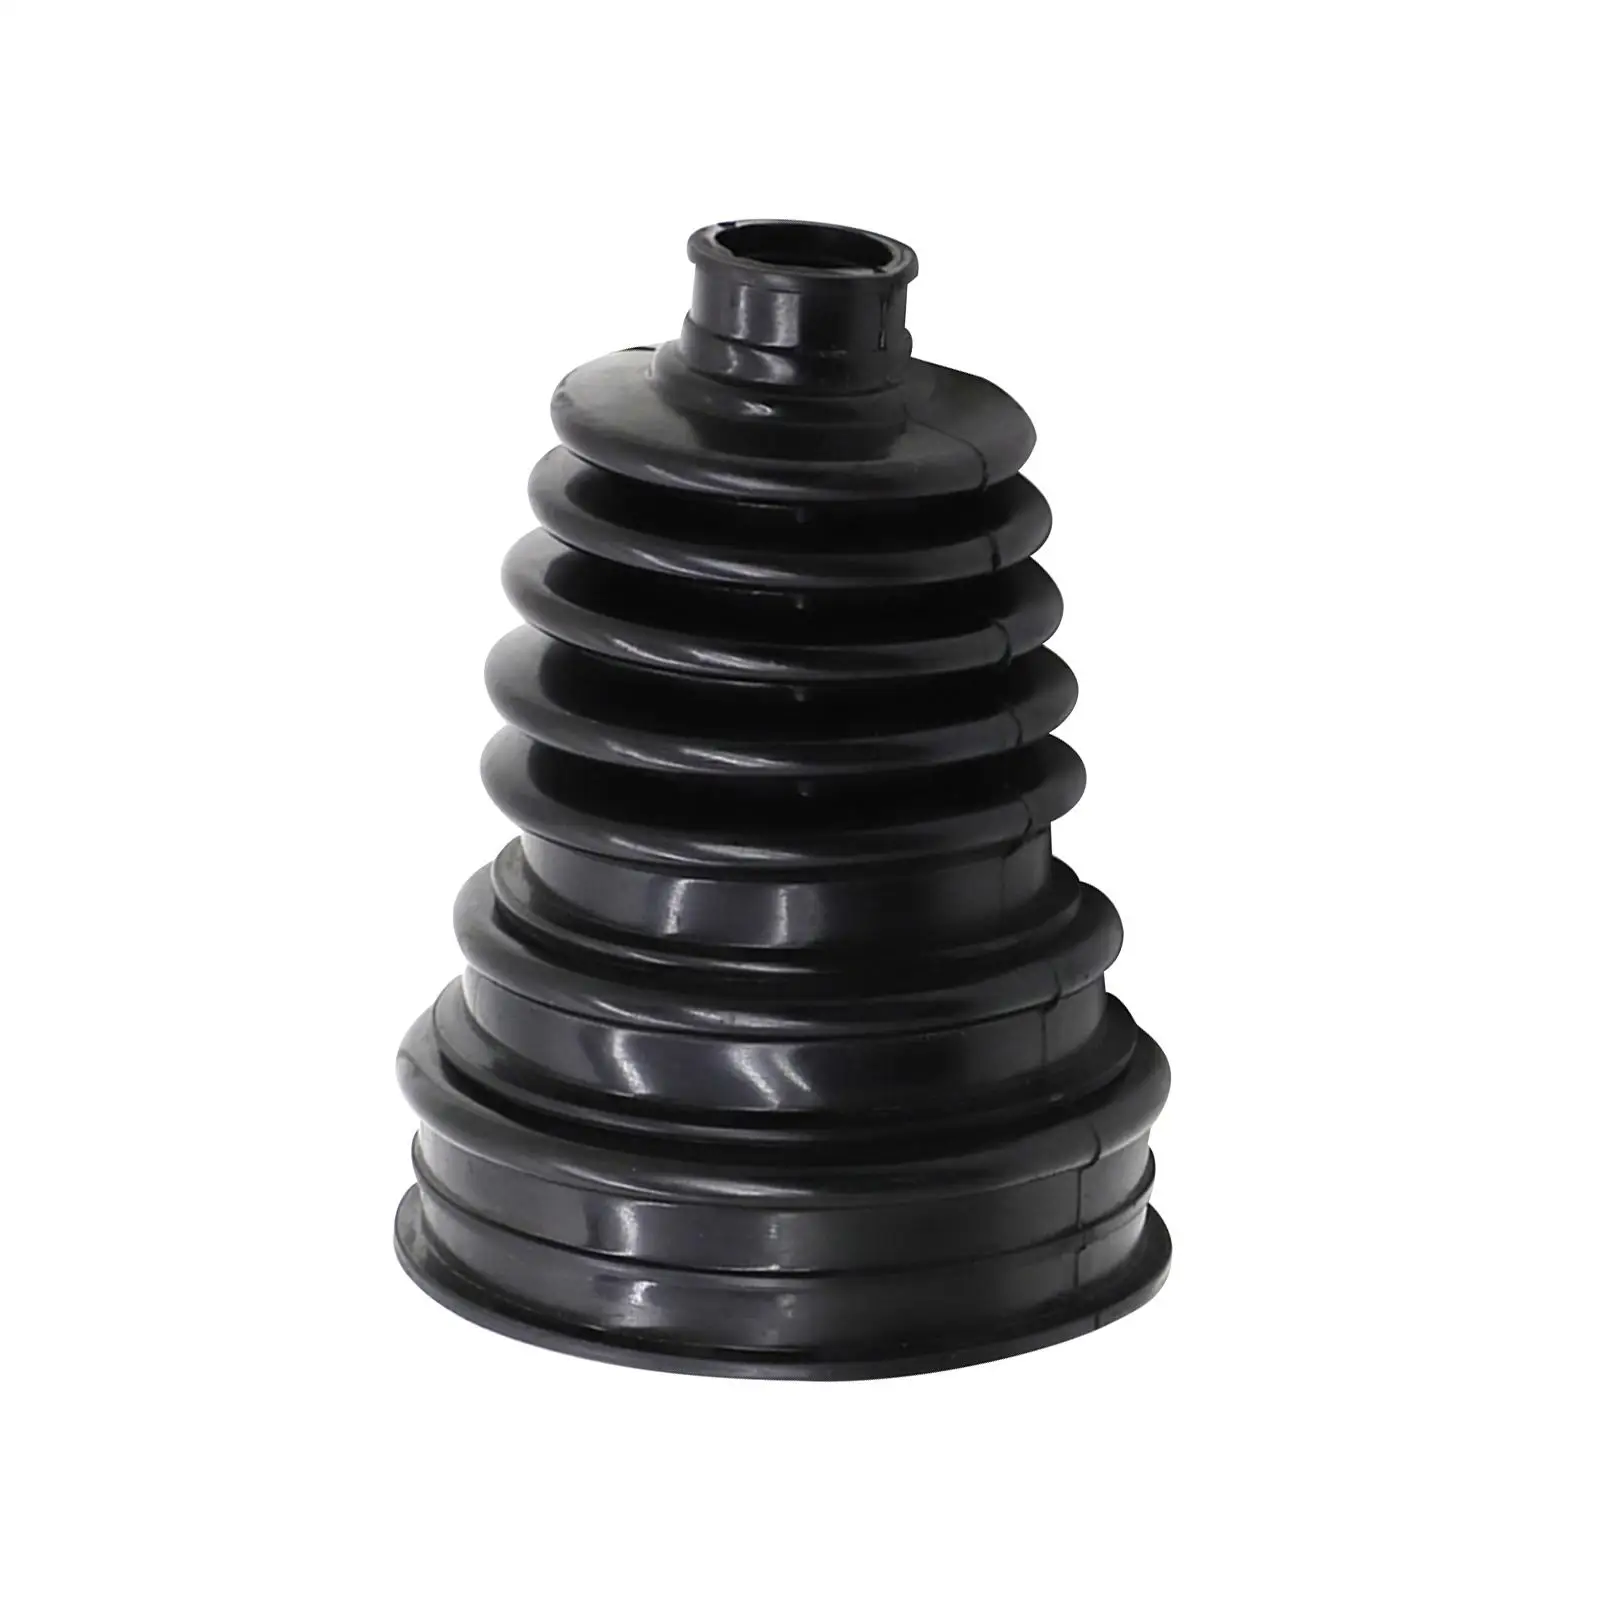 Car CV Joint Boot Dust Rubber Durable Adjustable Easy to Install for Car Automotive